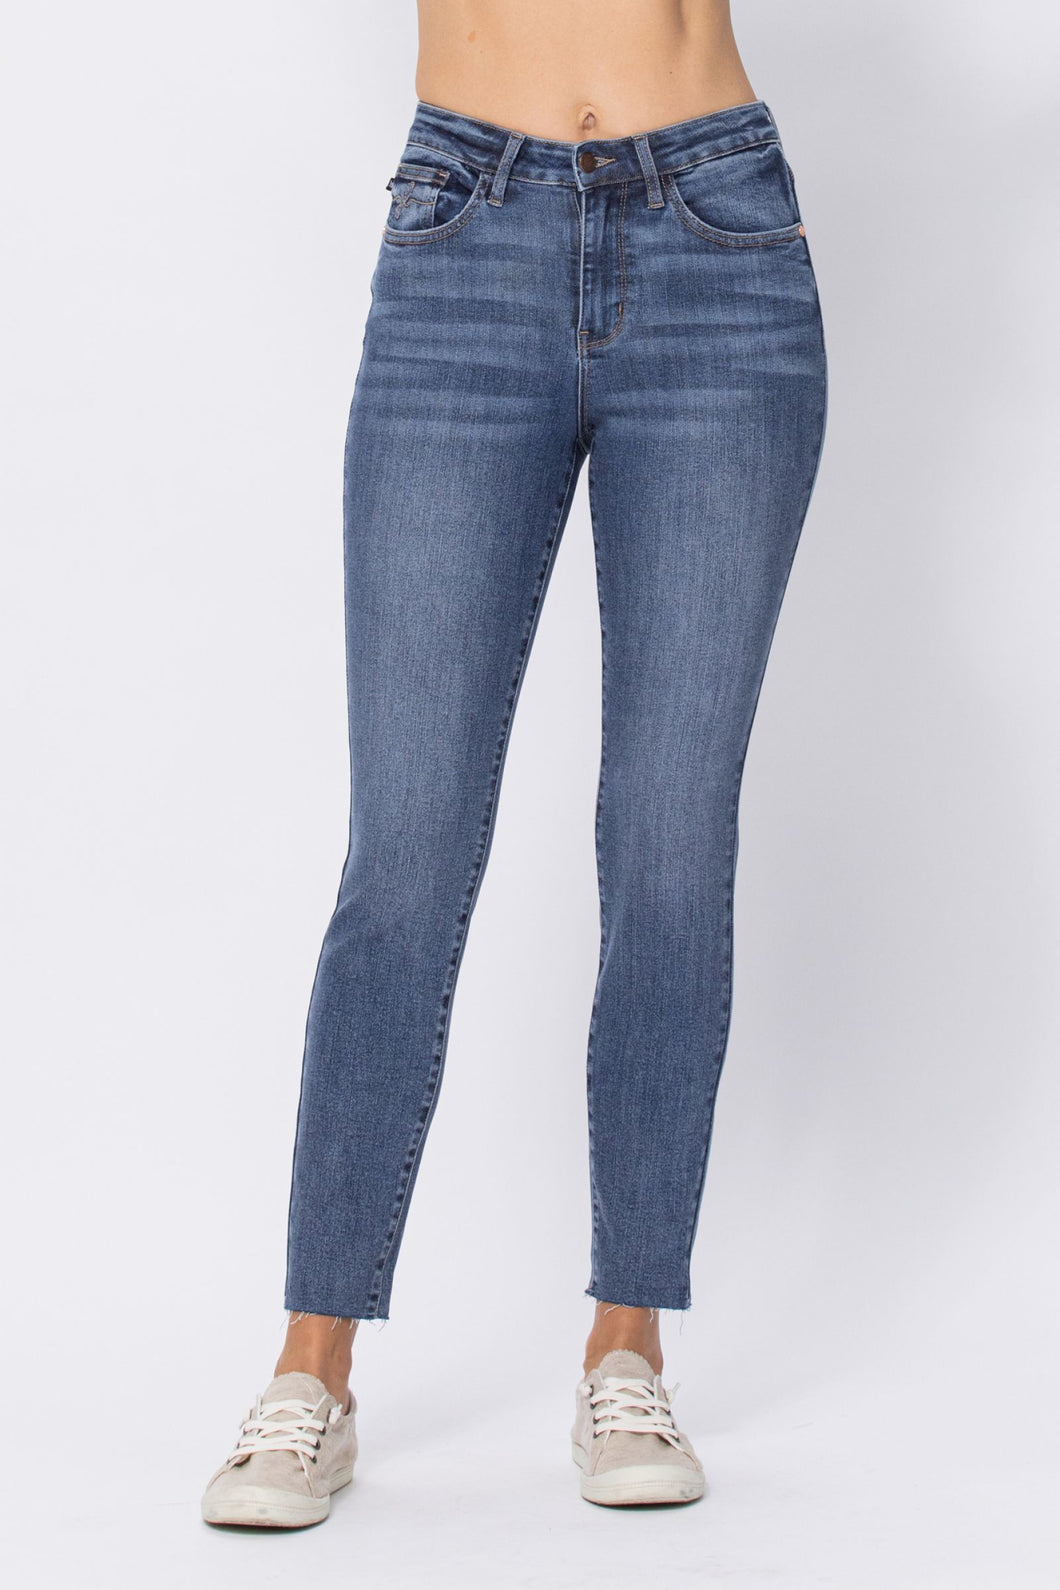 Judy Blue Hi-Rise Relaxed Fit Denim